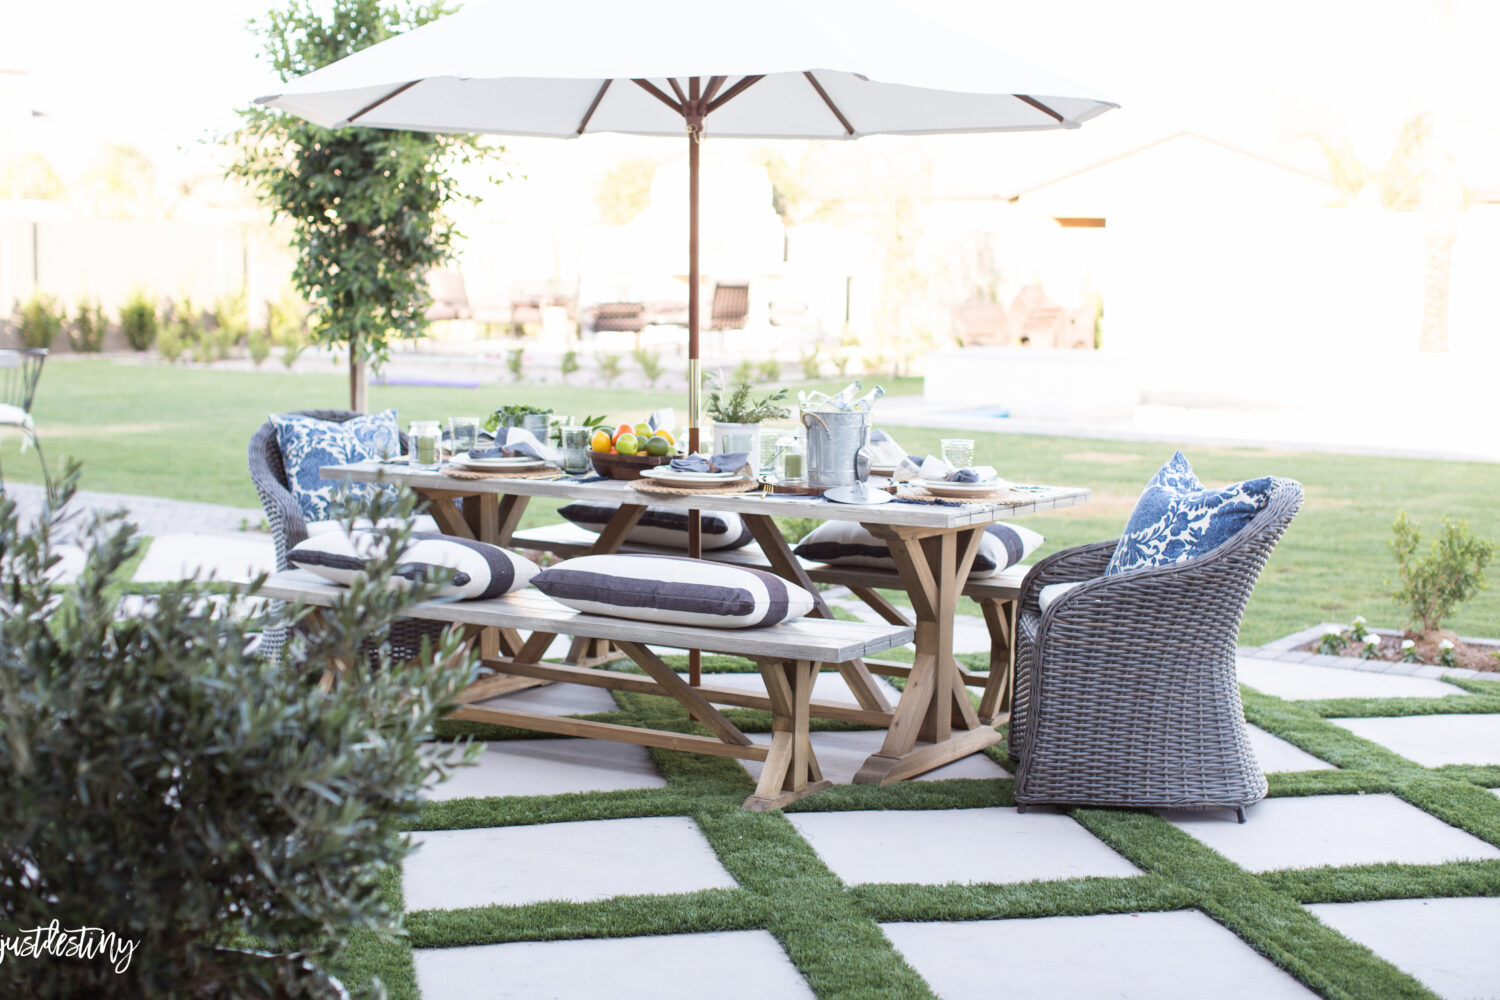 Setting an Outdoor Table